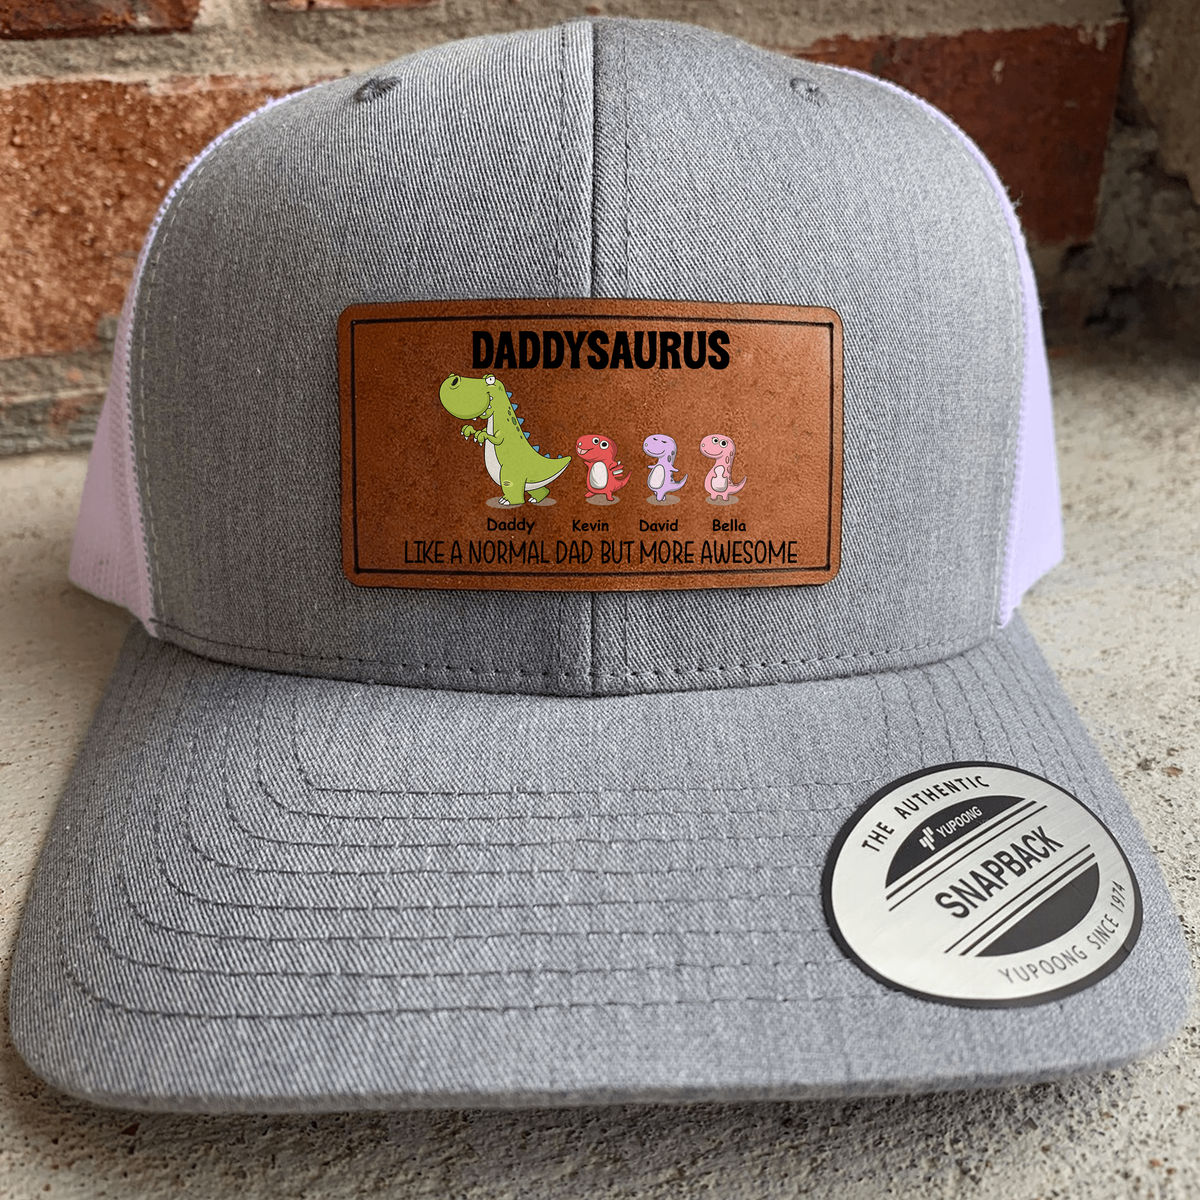 Dad Hats - Father's Day Gifts - Dadasaurus Like a normal Dad but more Awesome - Personalized cap